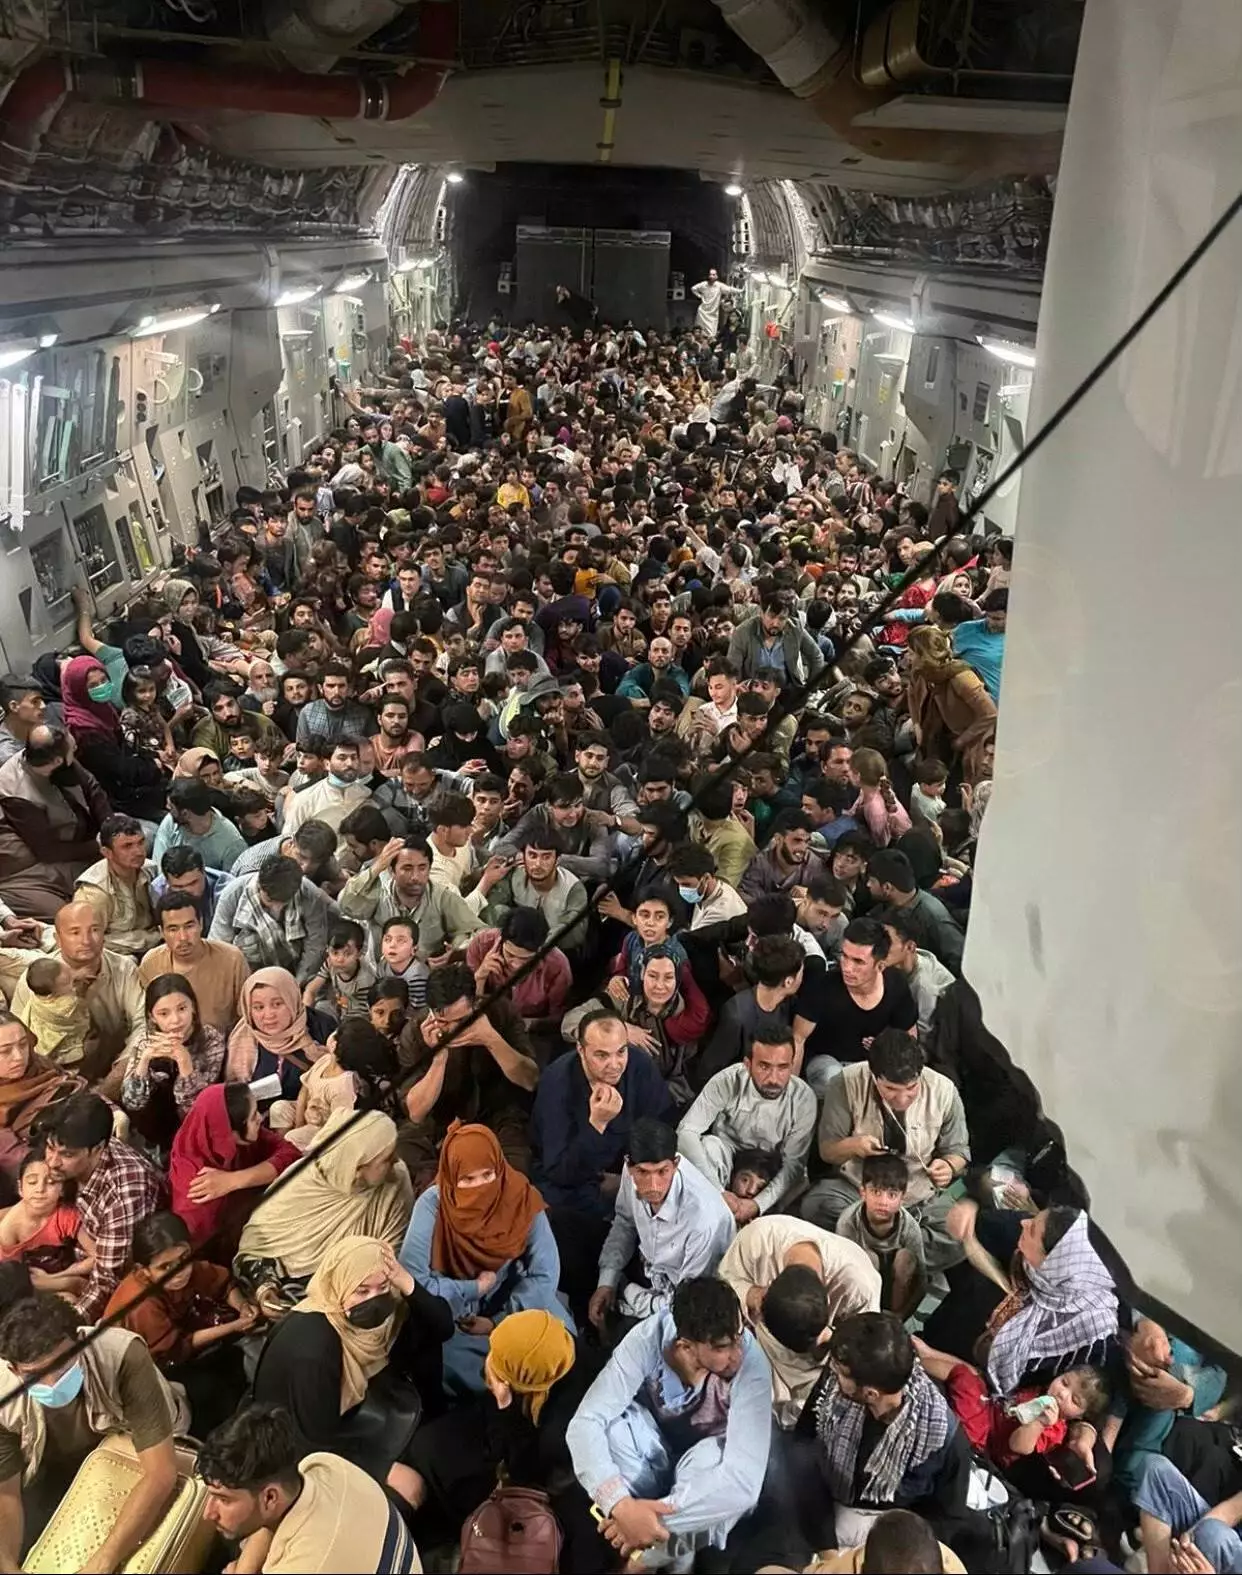 Hundreds of Afghans packed onto a US military cargo plane in a desperate attempt to leave the country (